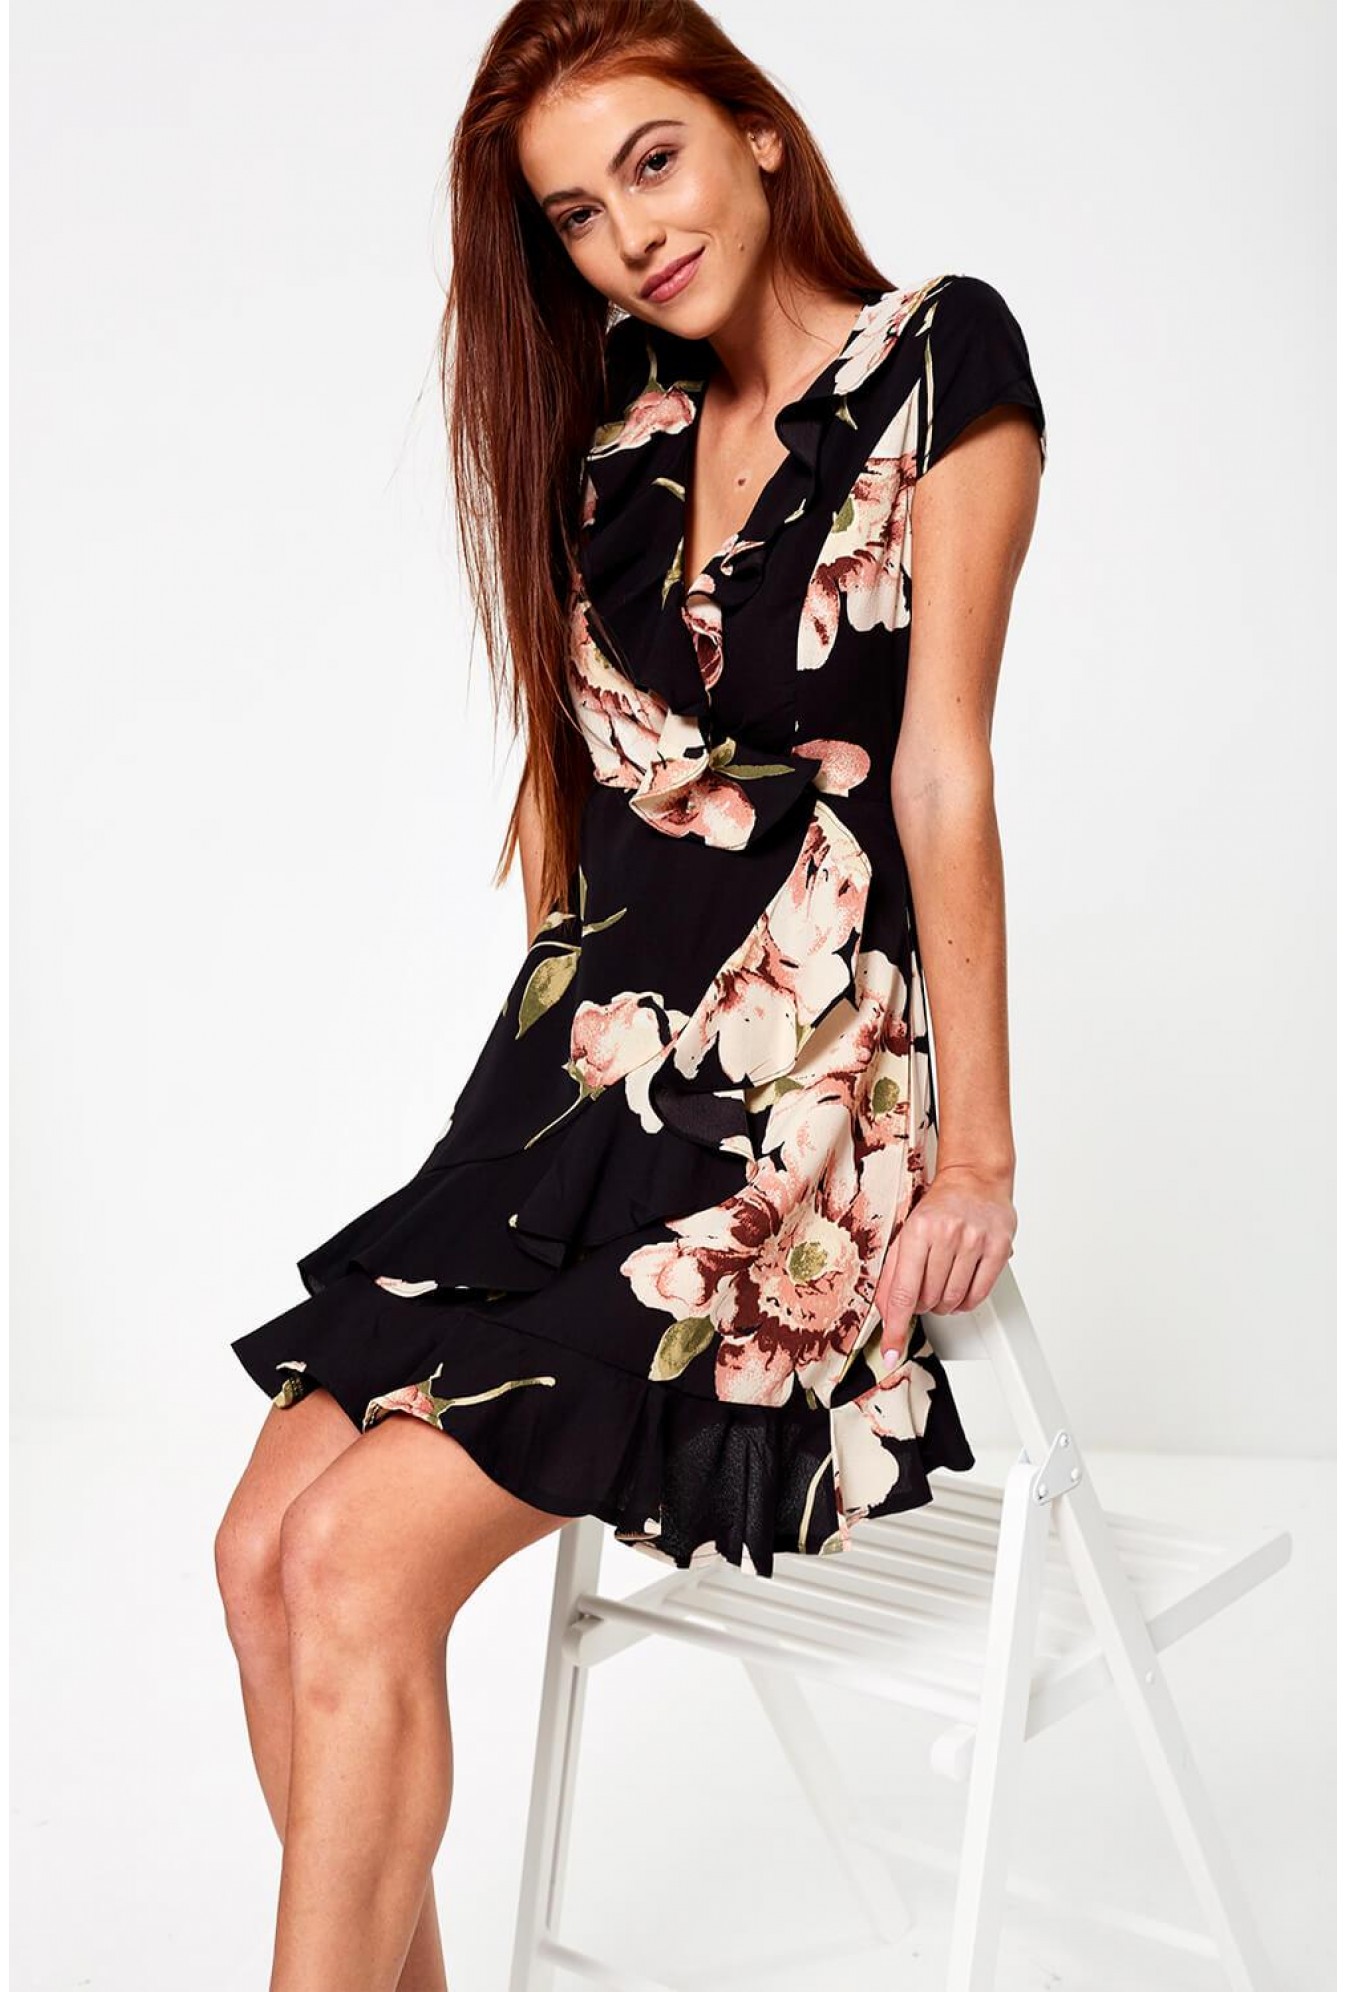 black with floral dress